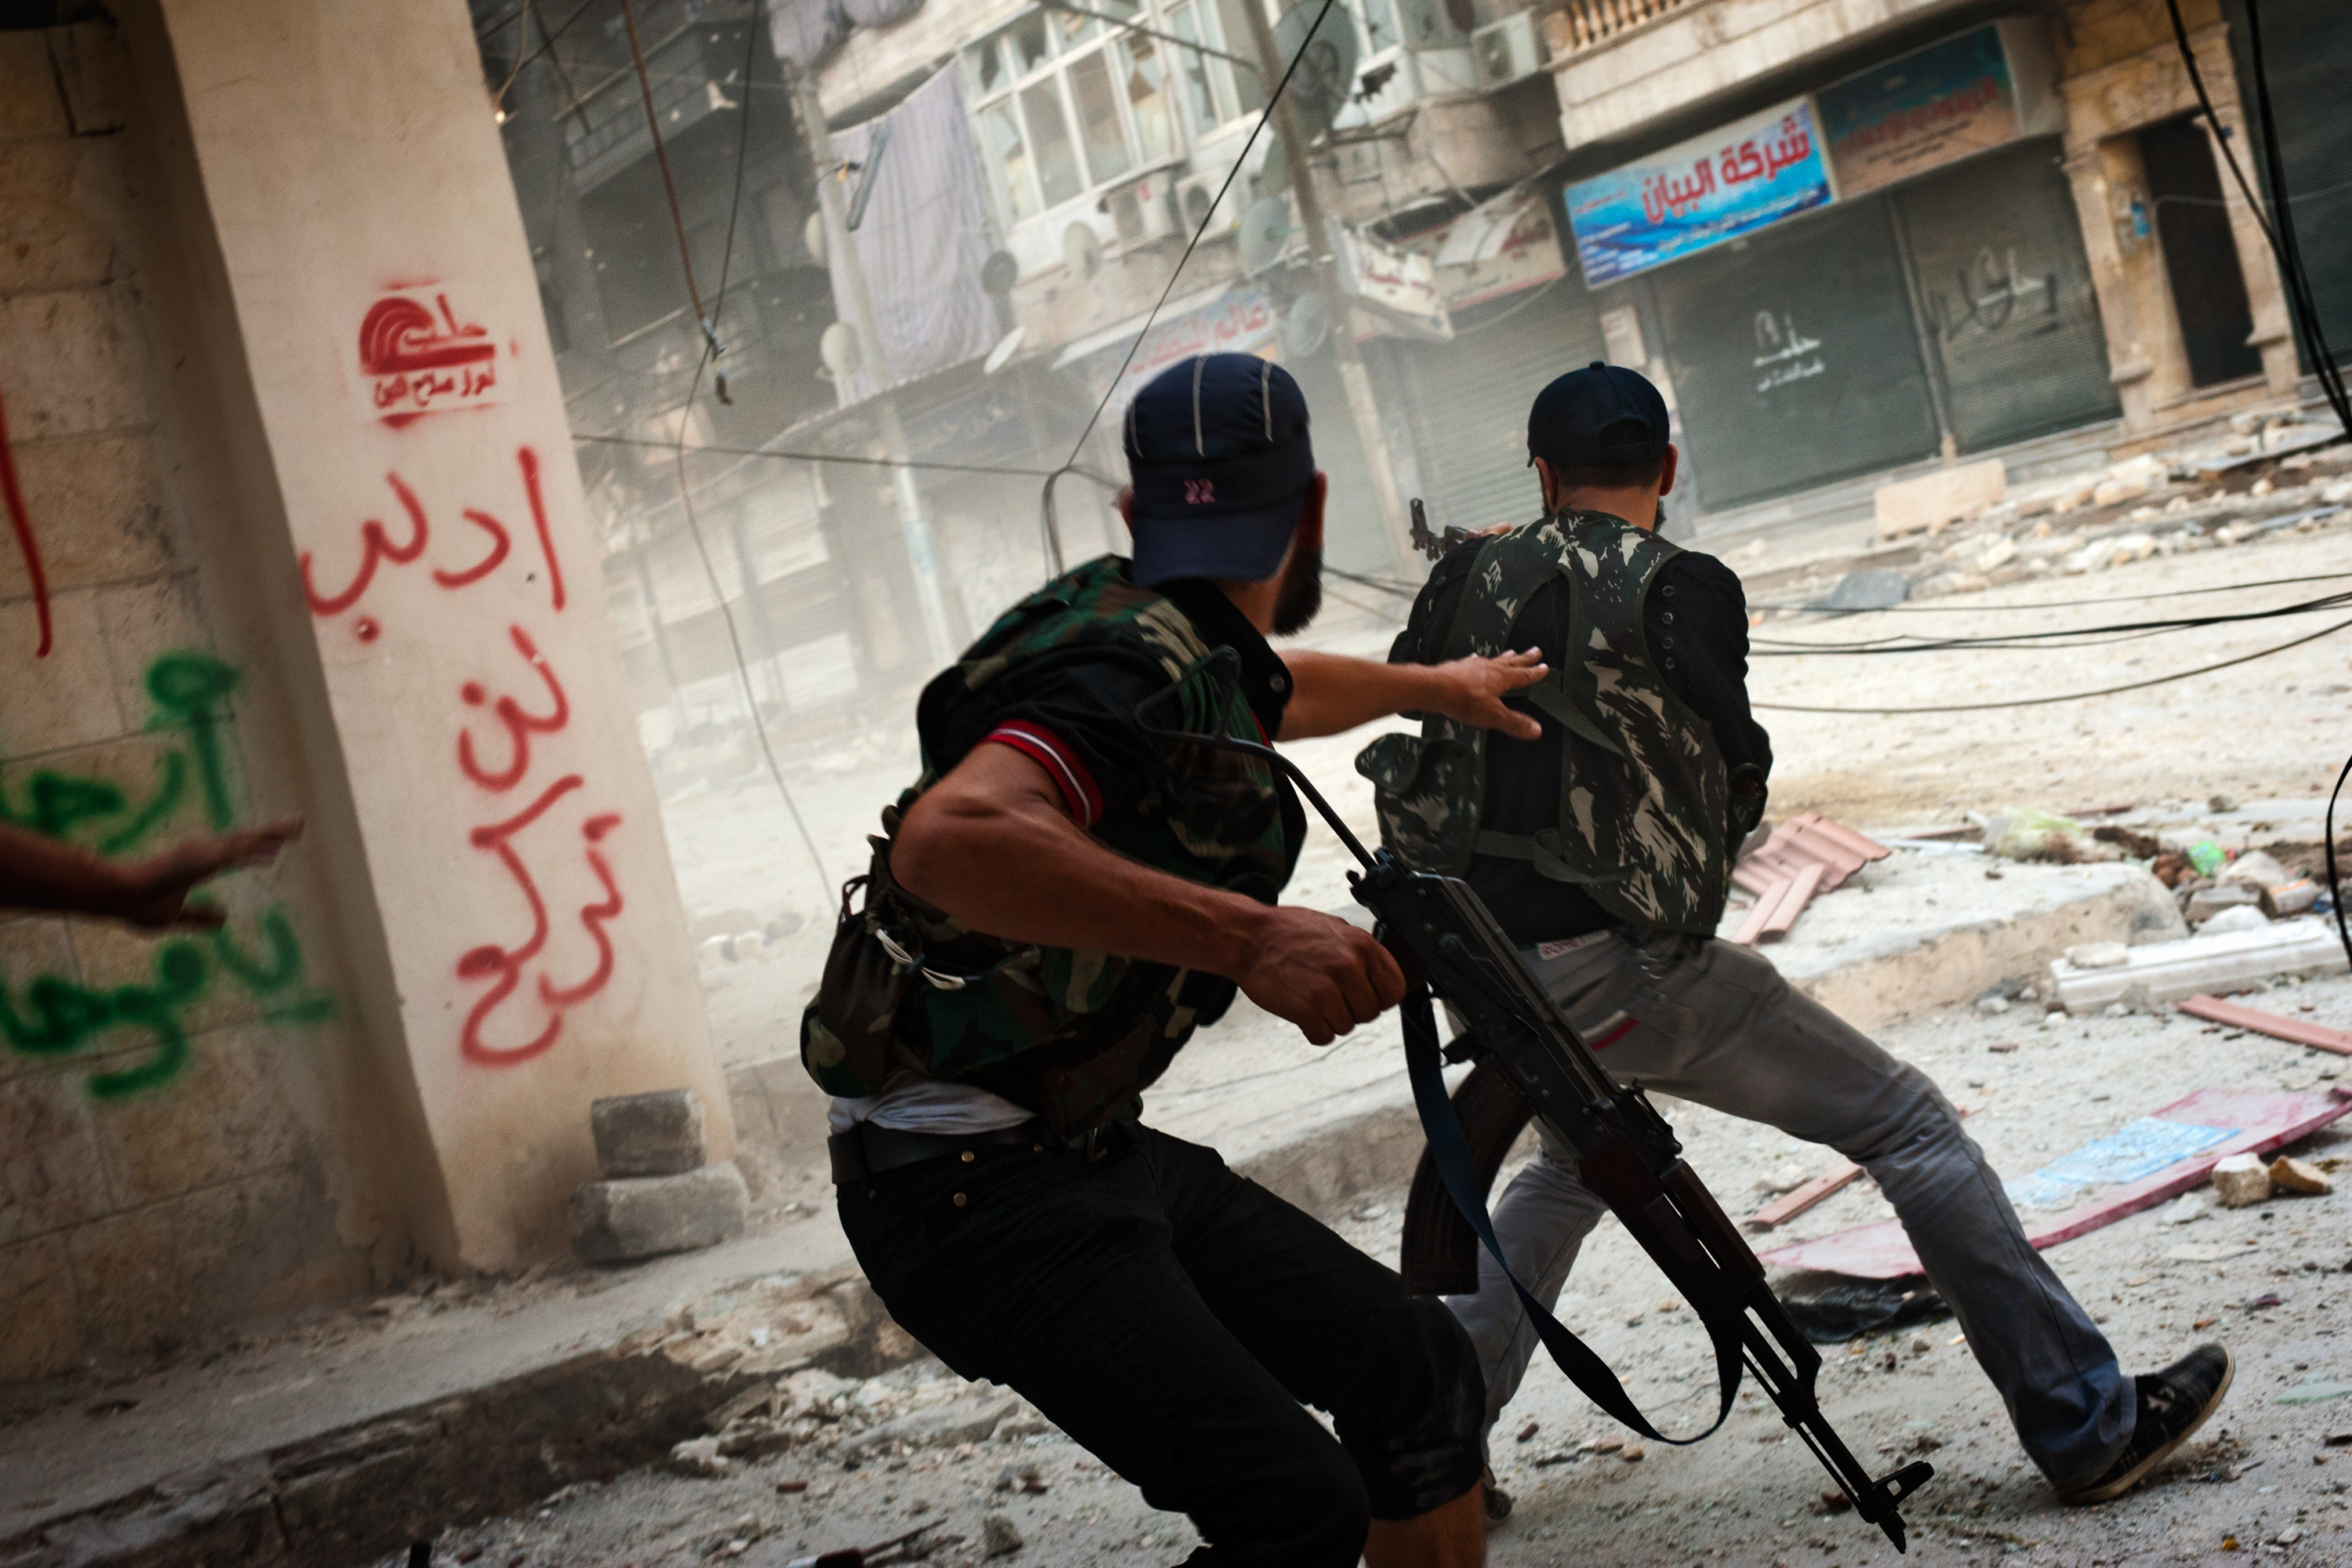 Free Syrian Army fighters exchange fire with regime forces in the Salah Al Din neighborhood of Aleppo, Aug. 22.